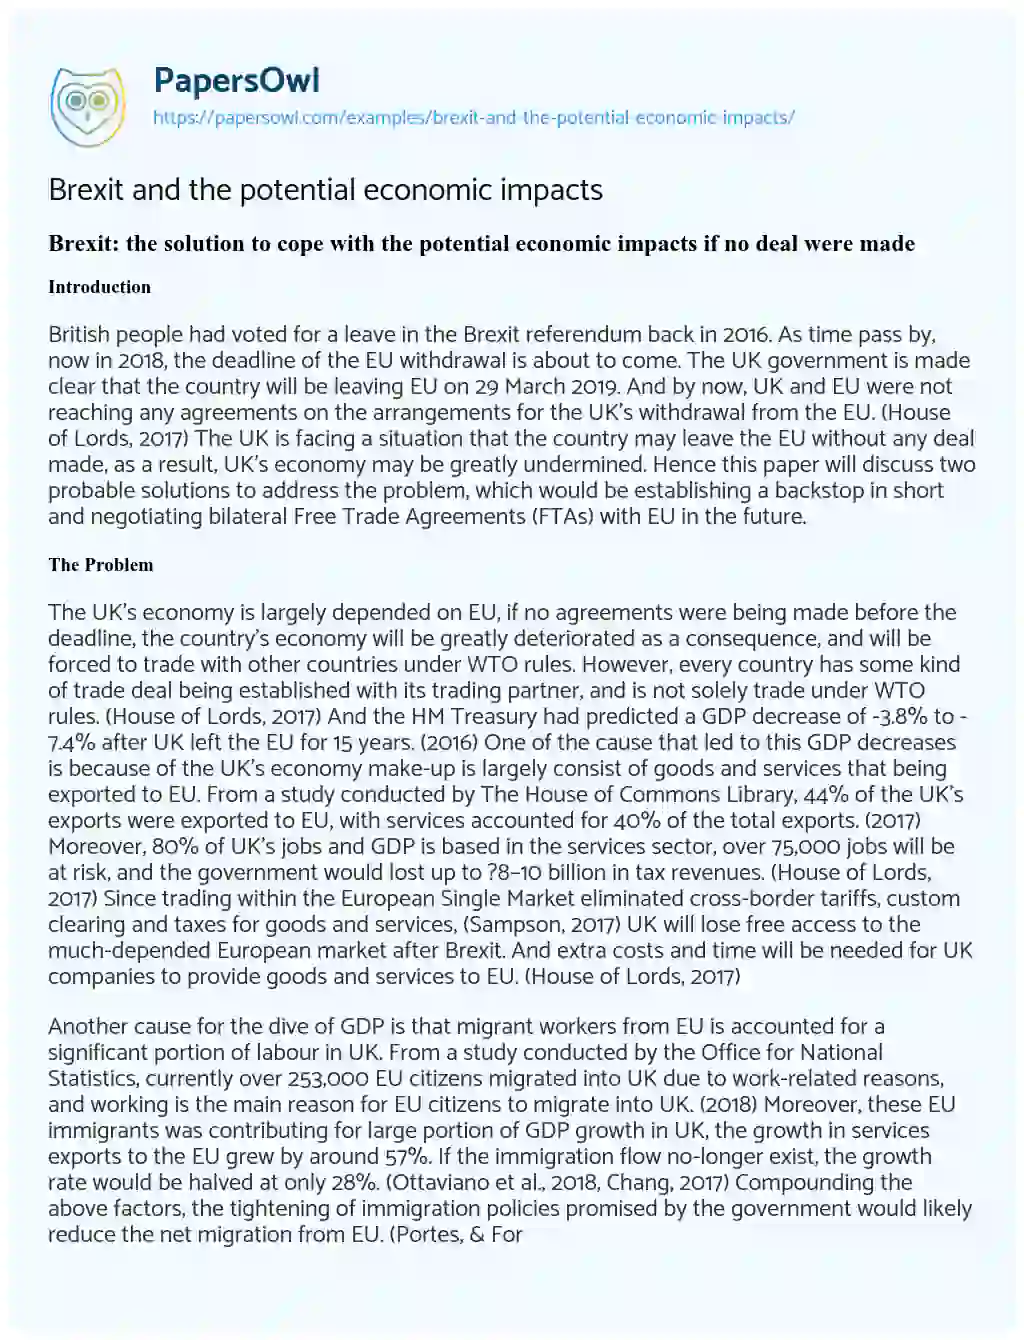 Brexit and the Potential Economic Impacts essay